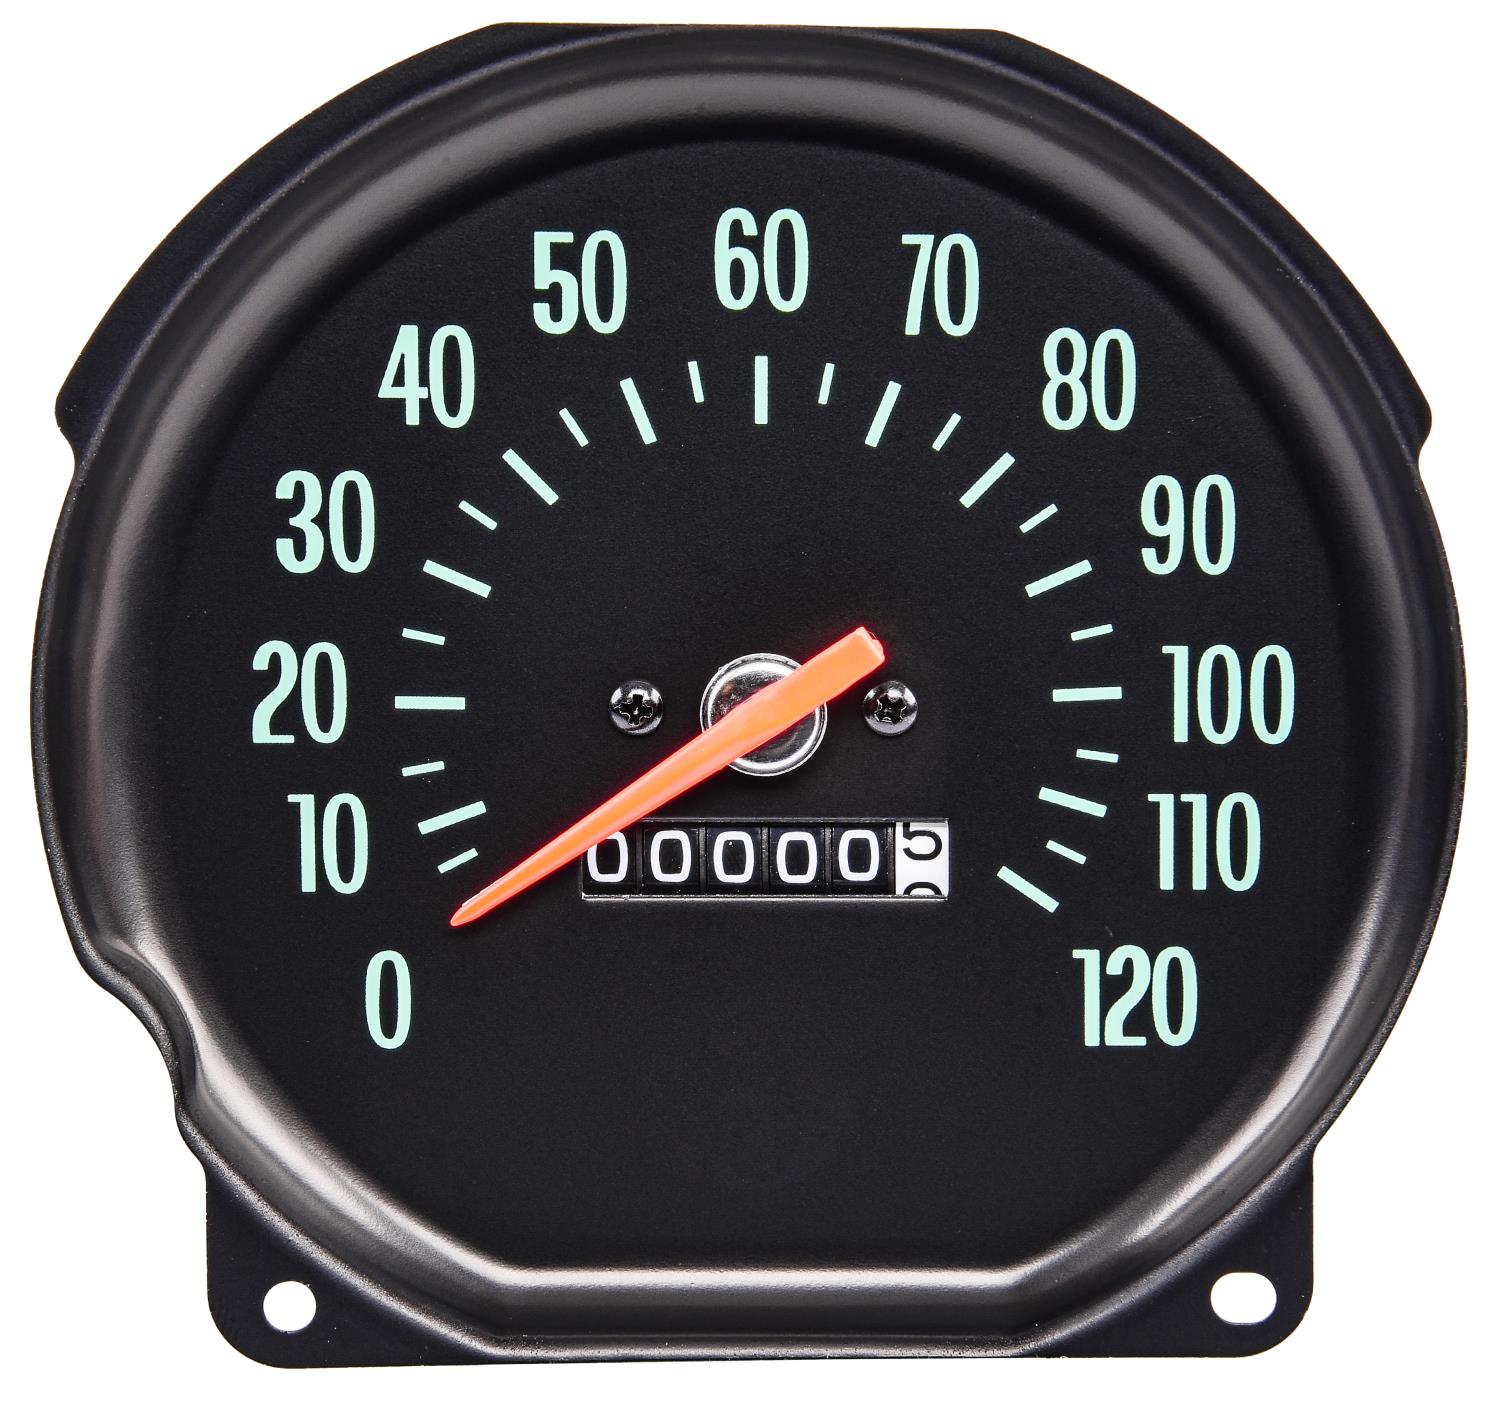 Factory Style Speedometer for 1970 Chevrolet Chevelle, El Camino and Monte Carlo with SS Dash and Floor Shift [0-120 MPH]